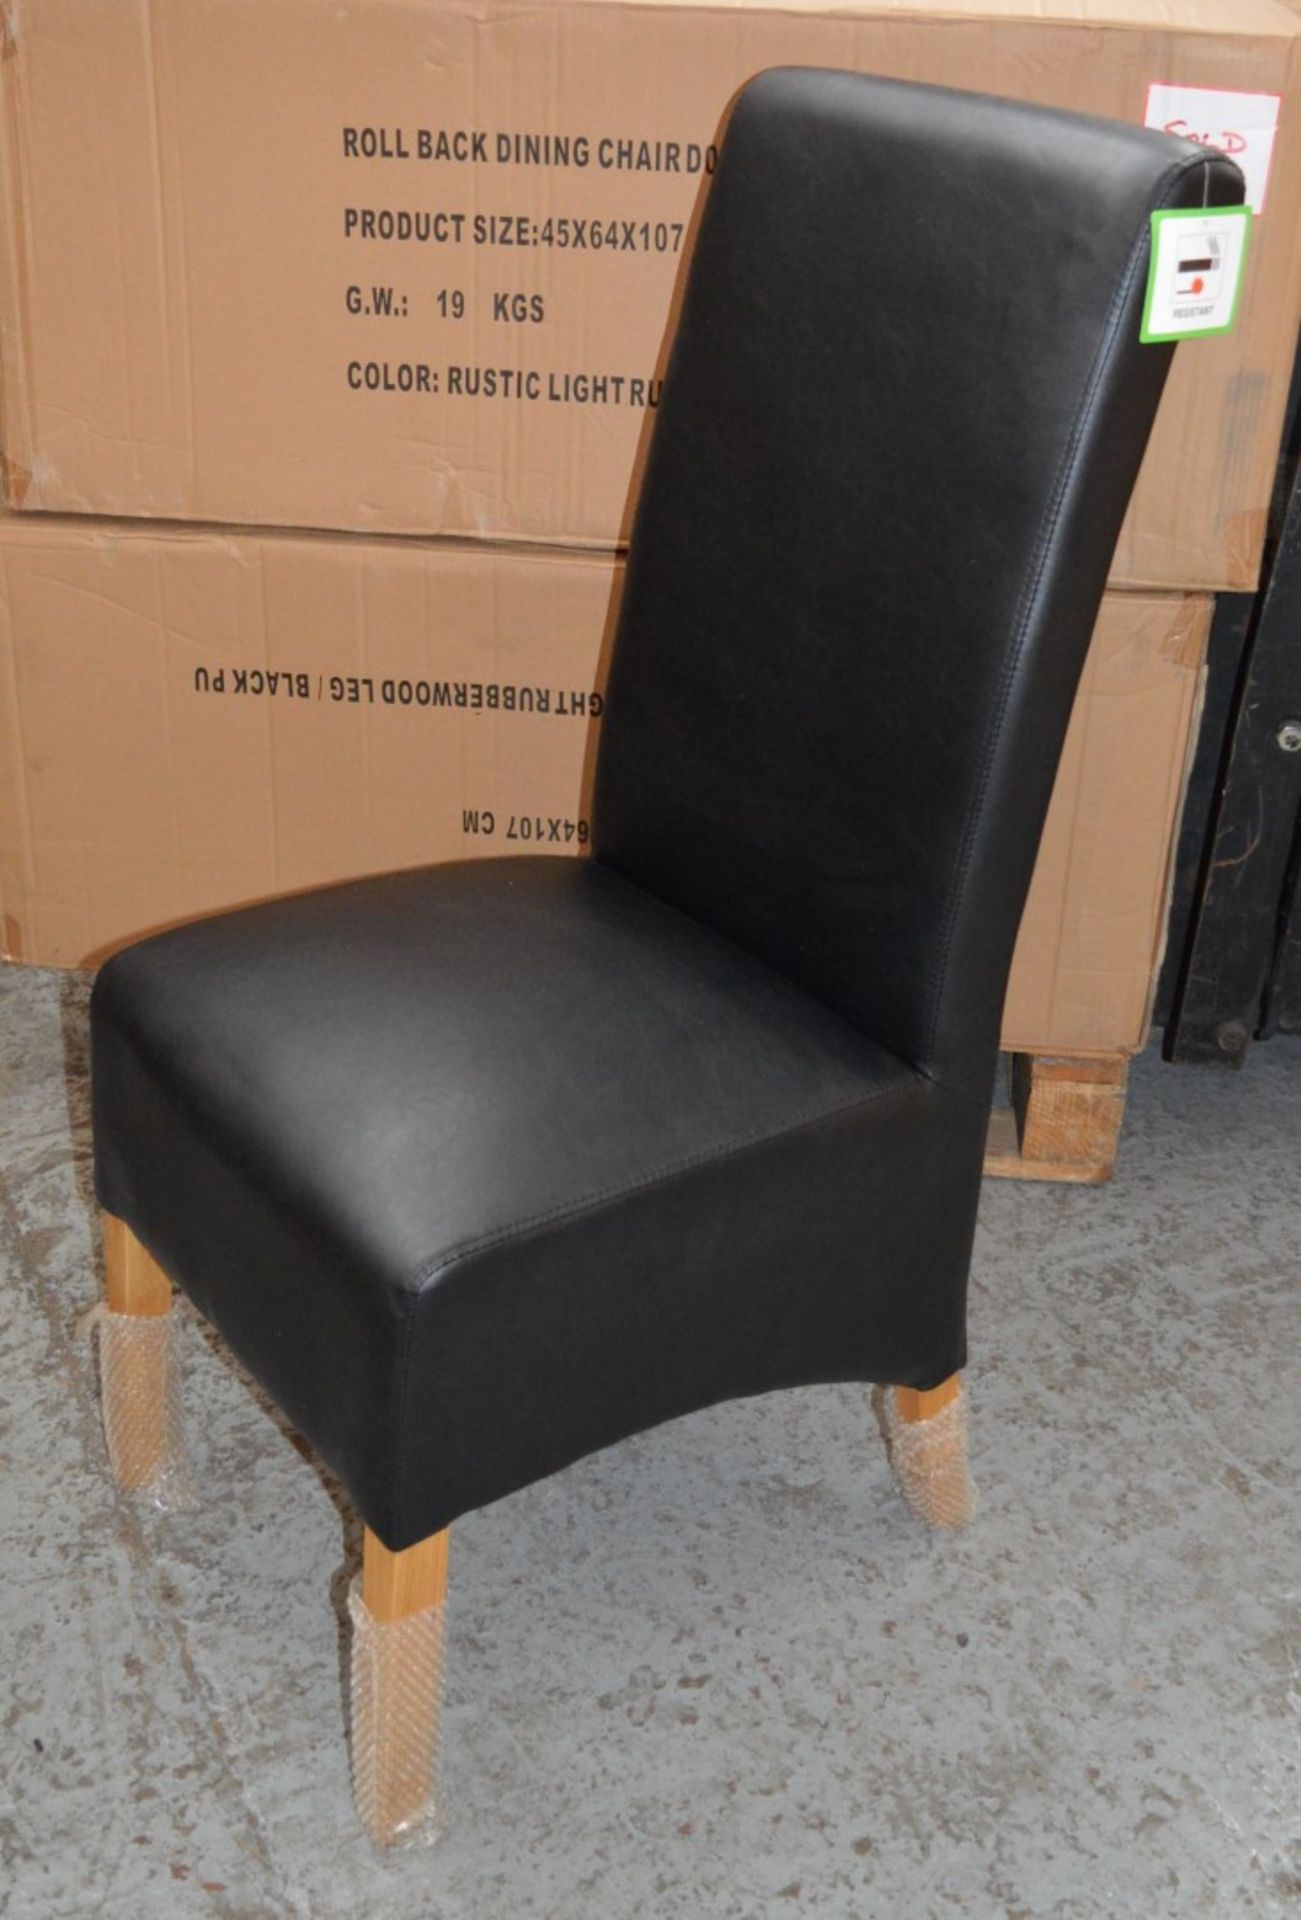 2 x Black Faux Leather Dining Chairs - Seating Dimensions: W44 x D60 x Height 106cm, Seat Height 47c - Image 4 of 7